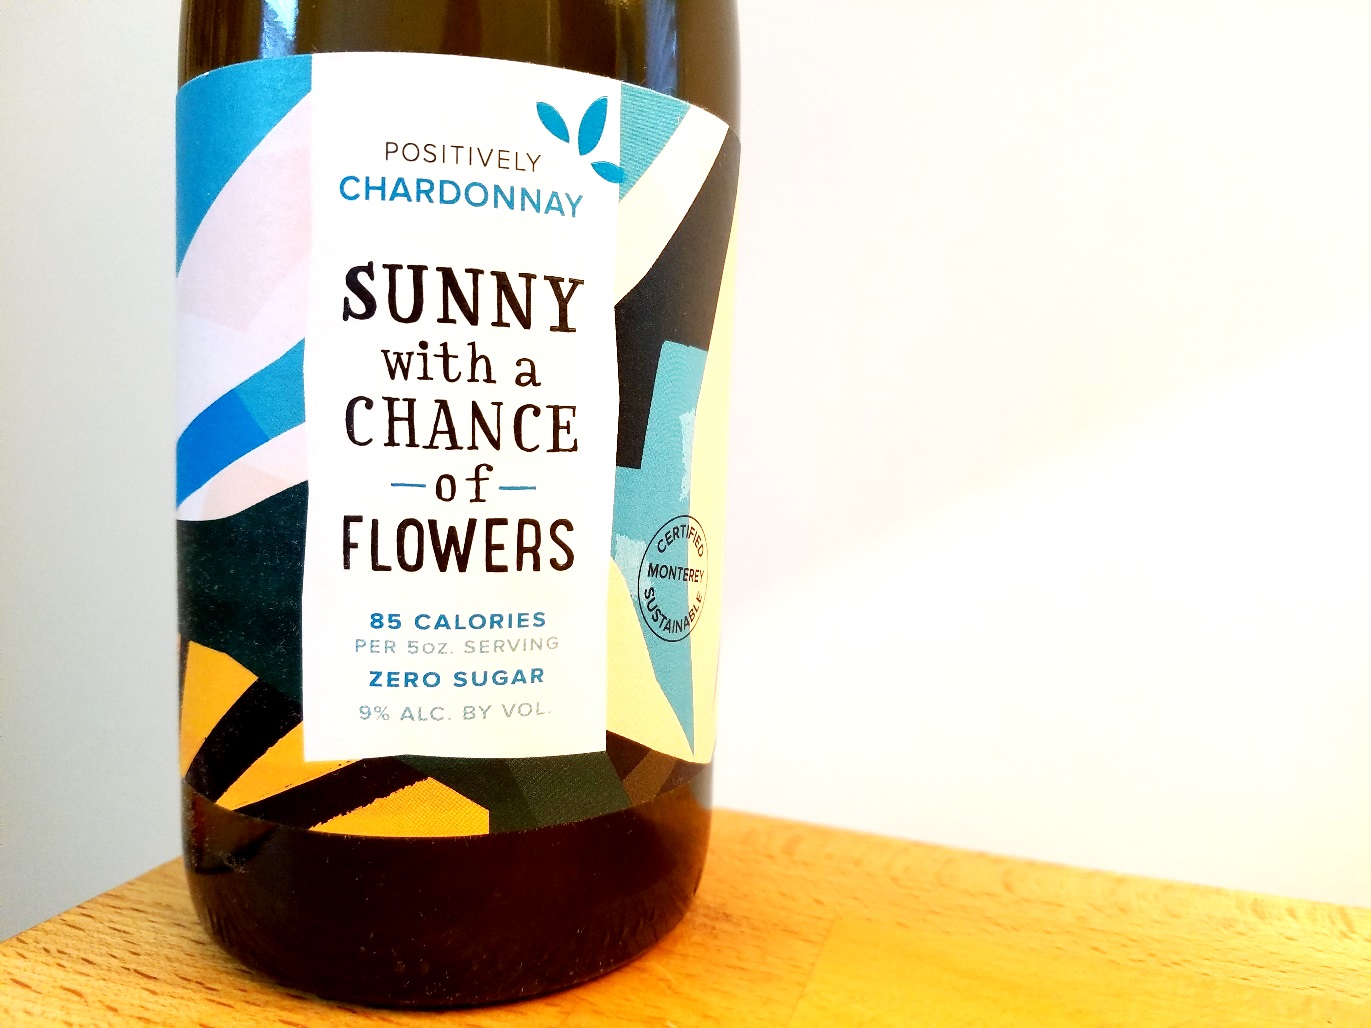 Sunny with a Chance of Flowers, Positively Chardonnay 2019, Monterey, California, Wine Casual